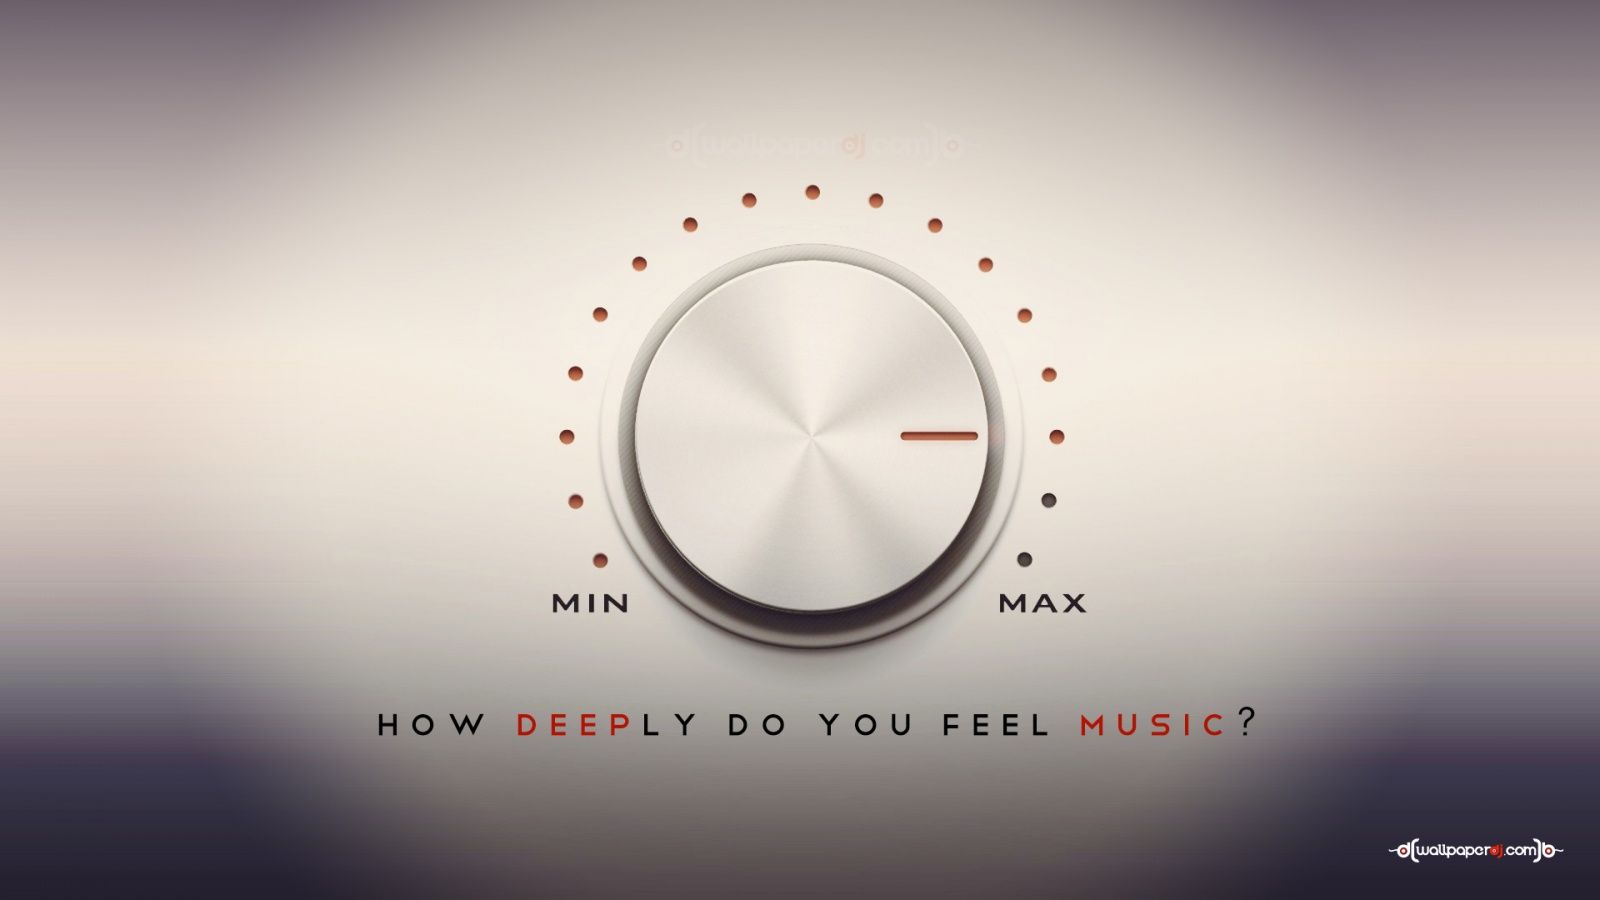 Feel Your Music wallpaper, music and dance wallpaper